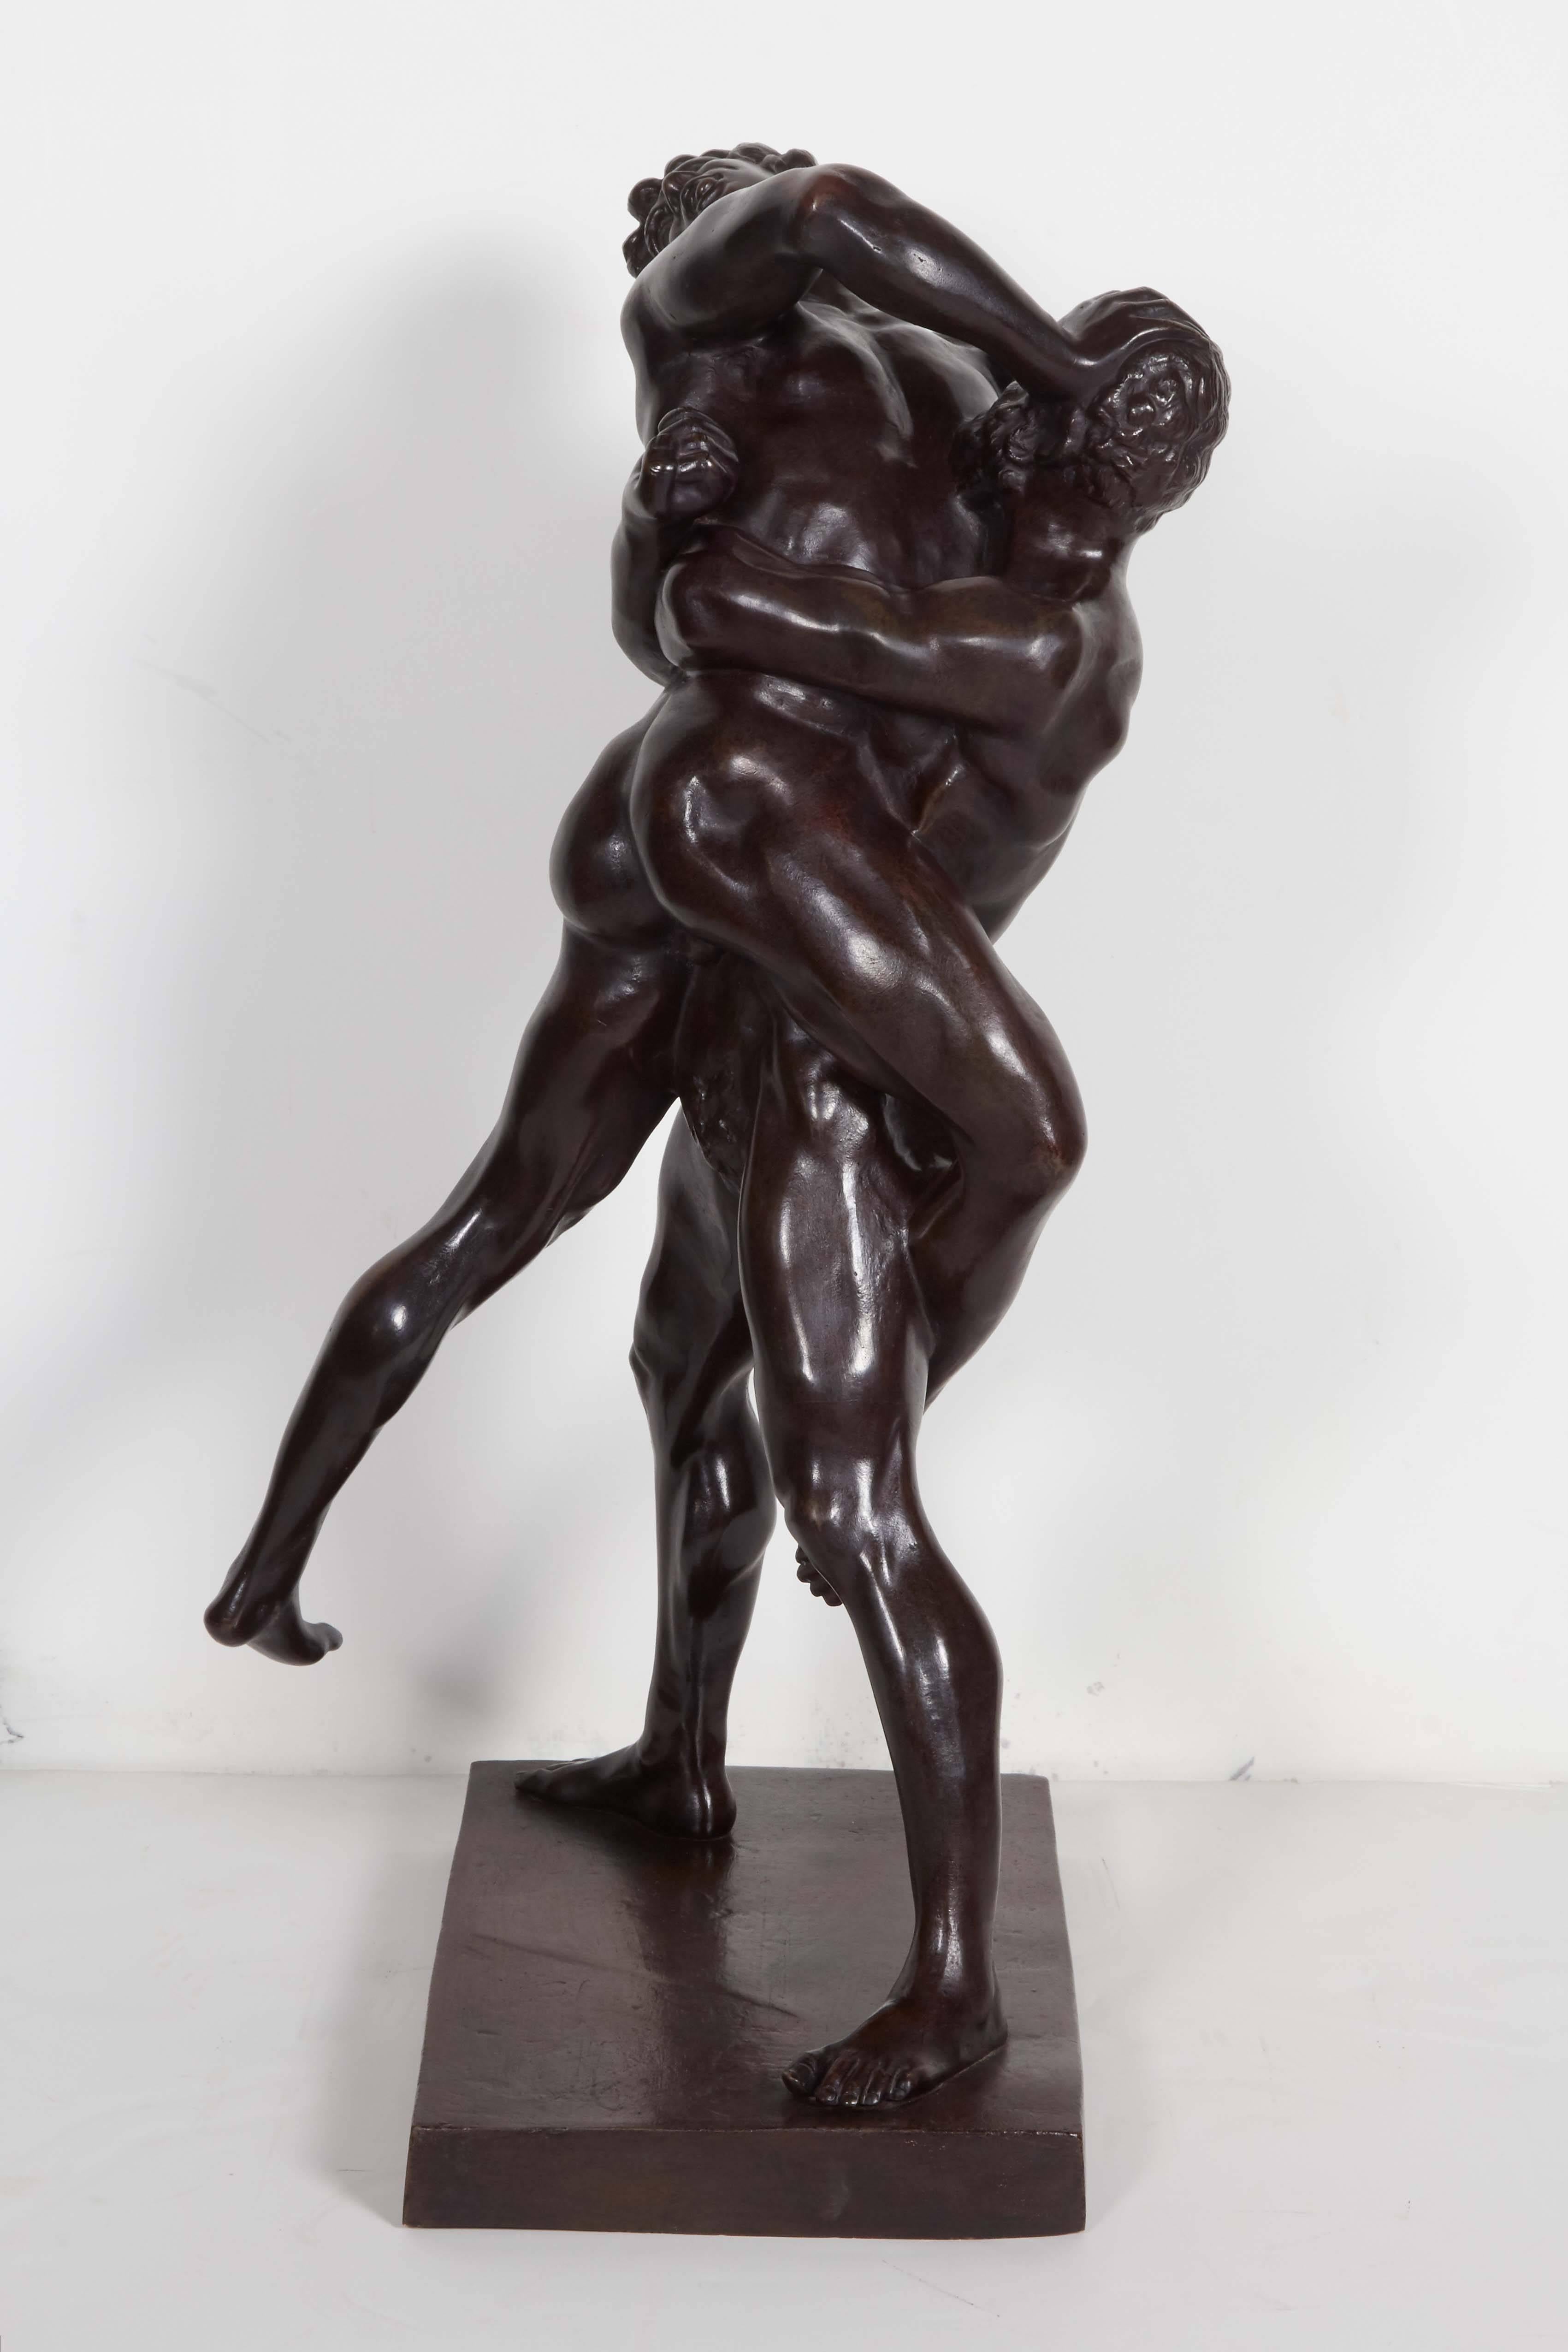 Powerful action packed statue of two muscular, nude male athletes, finished in a deep chocolate brown patina. Kinetic movement and anatomical detail make this a robust and compelling sculpture. 
After the Greek wrestlers in the National Museum in